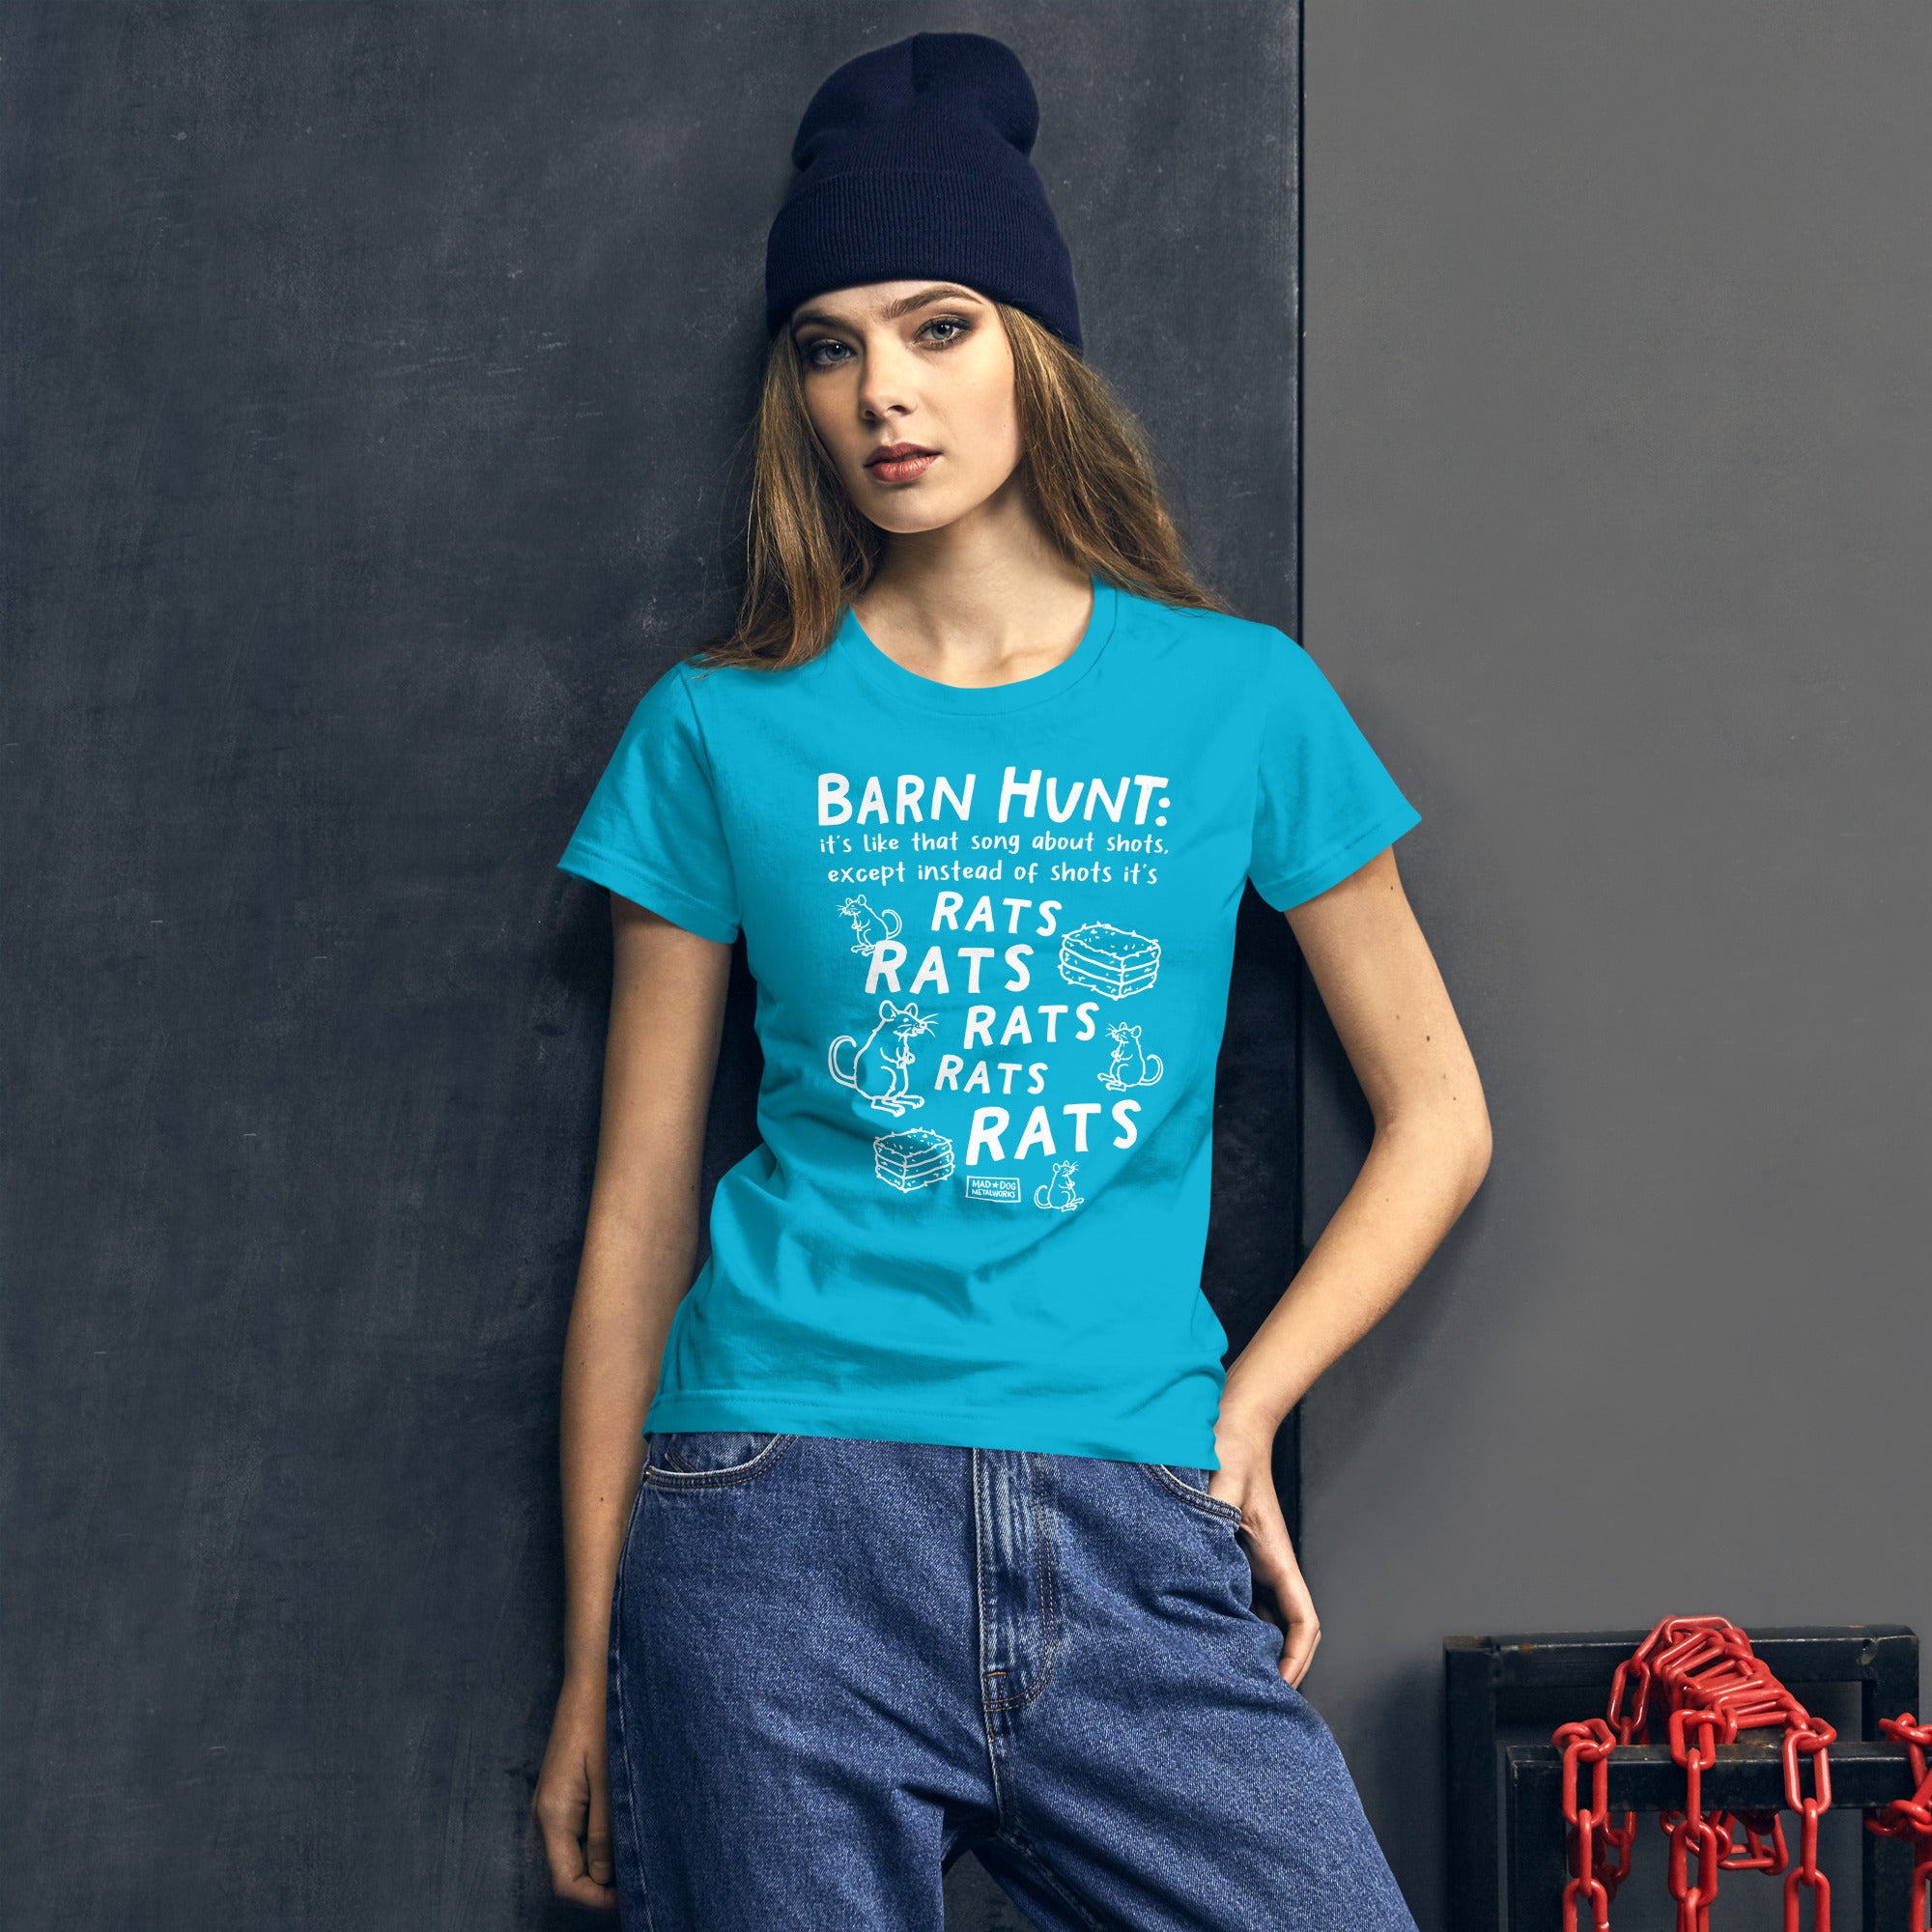 women's fitted t-shirt: barn hunt